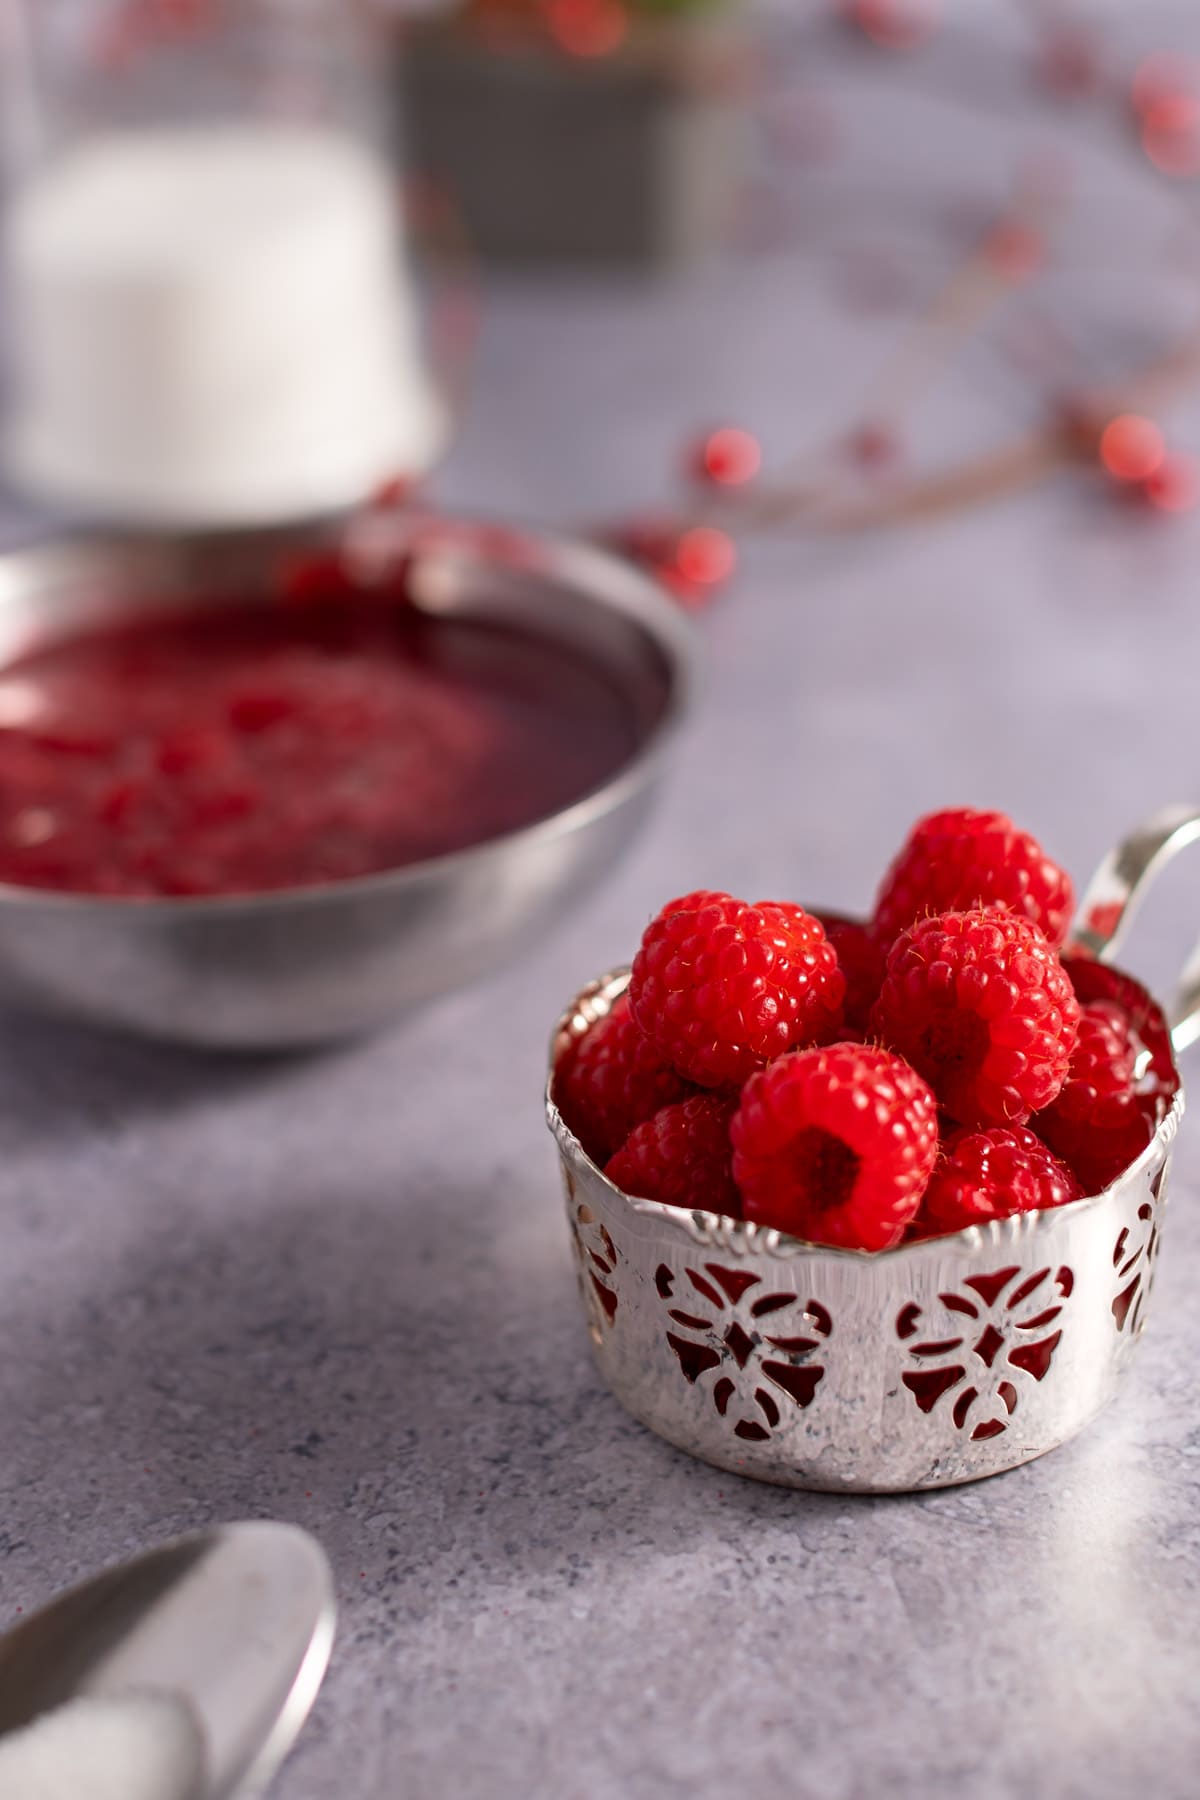 A small silver container filled with fresh raspberries sitting on a grey tabletop, with syrup and a garland of red berries in the background.